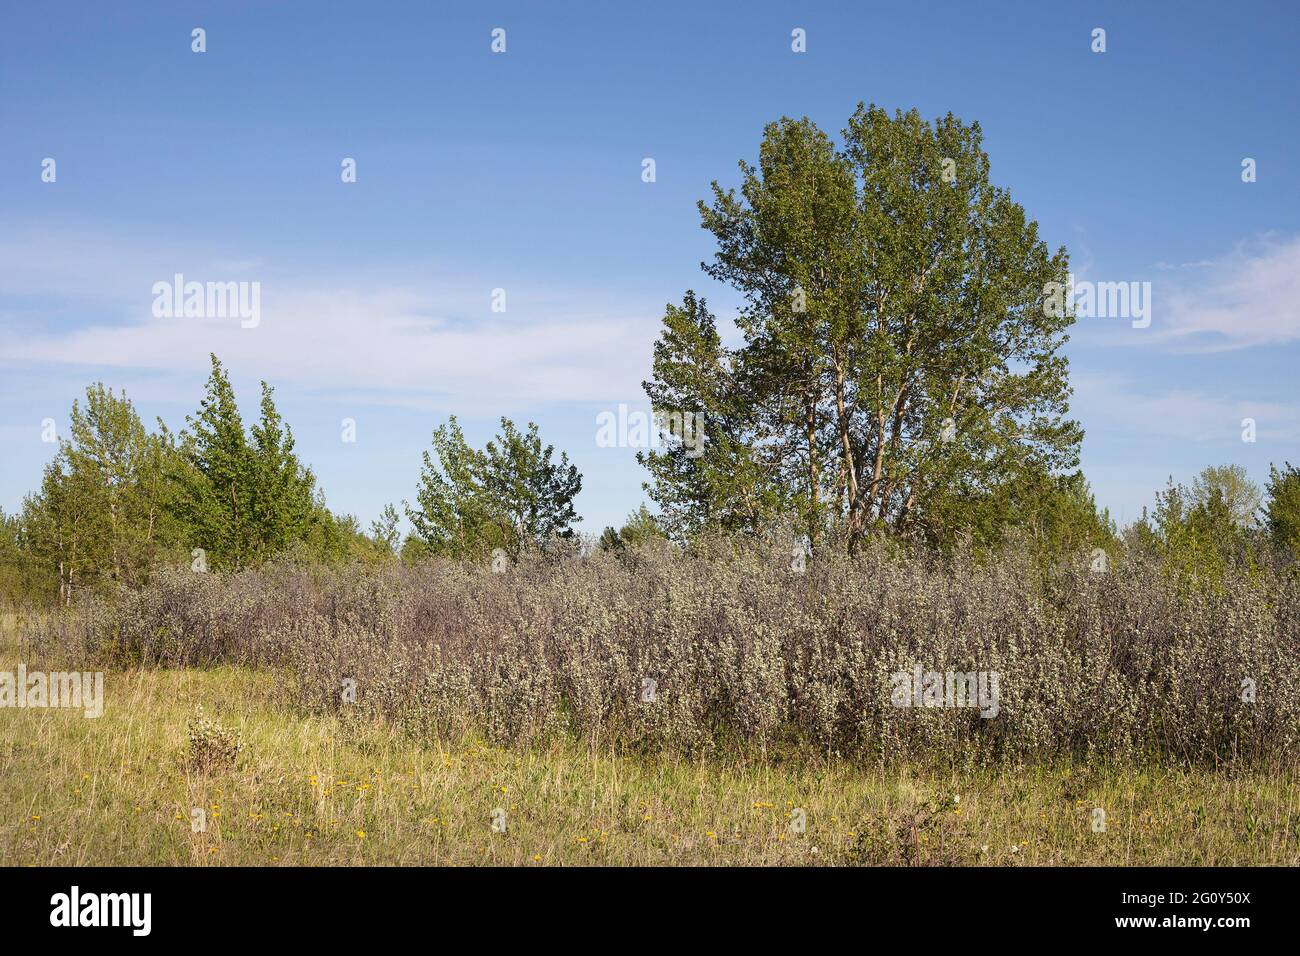 Prairie plant community of grasses, silverberry shrubs (Elaeagnus commutata) and Balsam Poplar trees in abandoned gravel pit reclaimed by nature Stock Photo